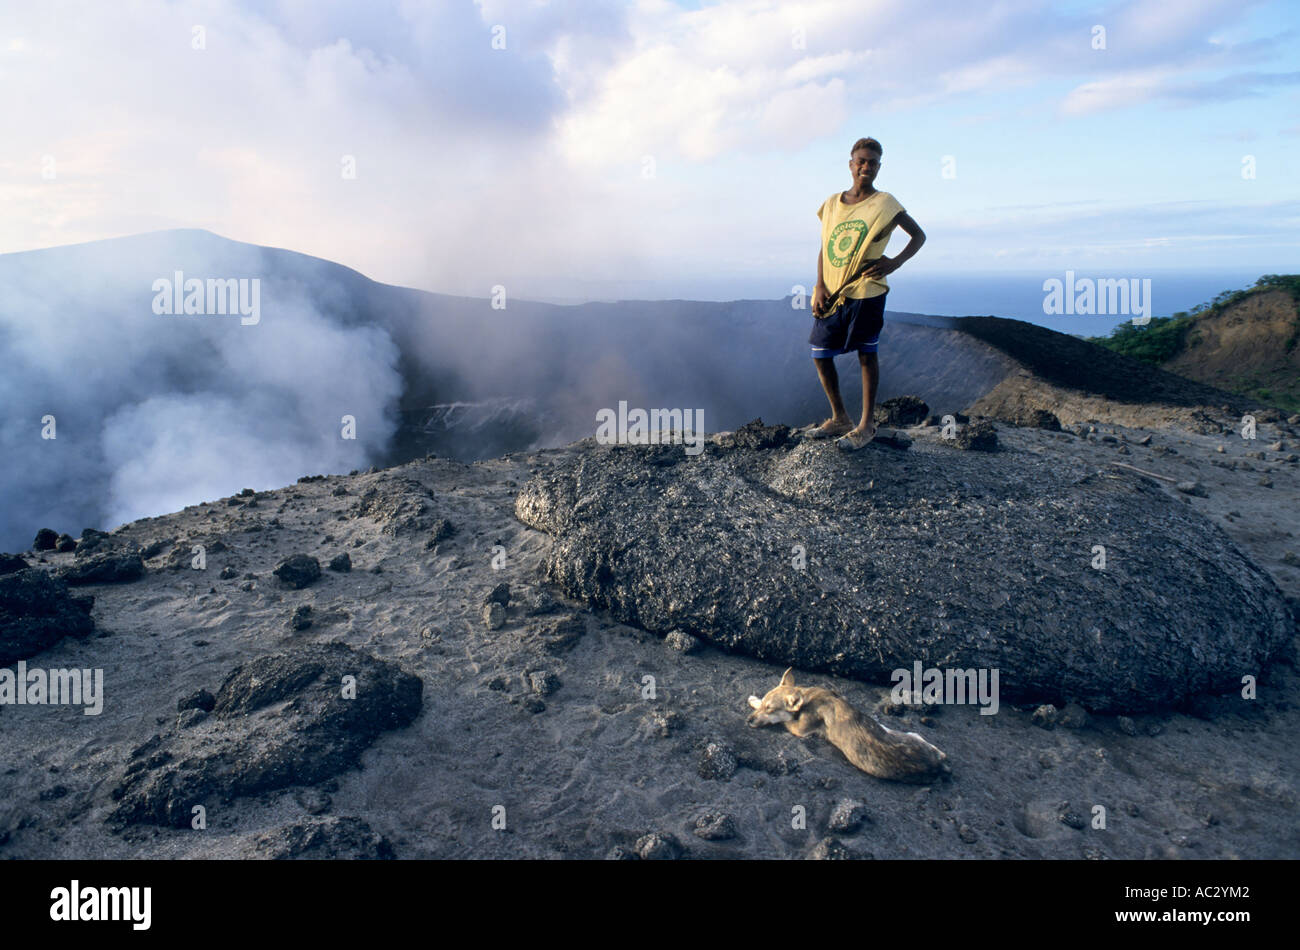 Local guide standing up on a freshly dropped lava bomb near the crater, Yasur Volcano, Sulphur Bay, Tanna, Vanuatu Stock Photo